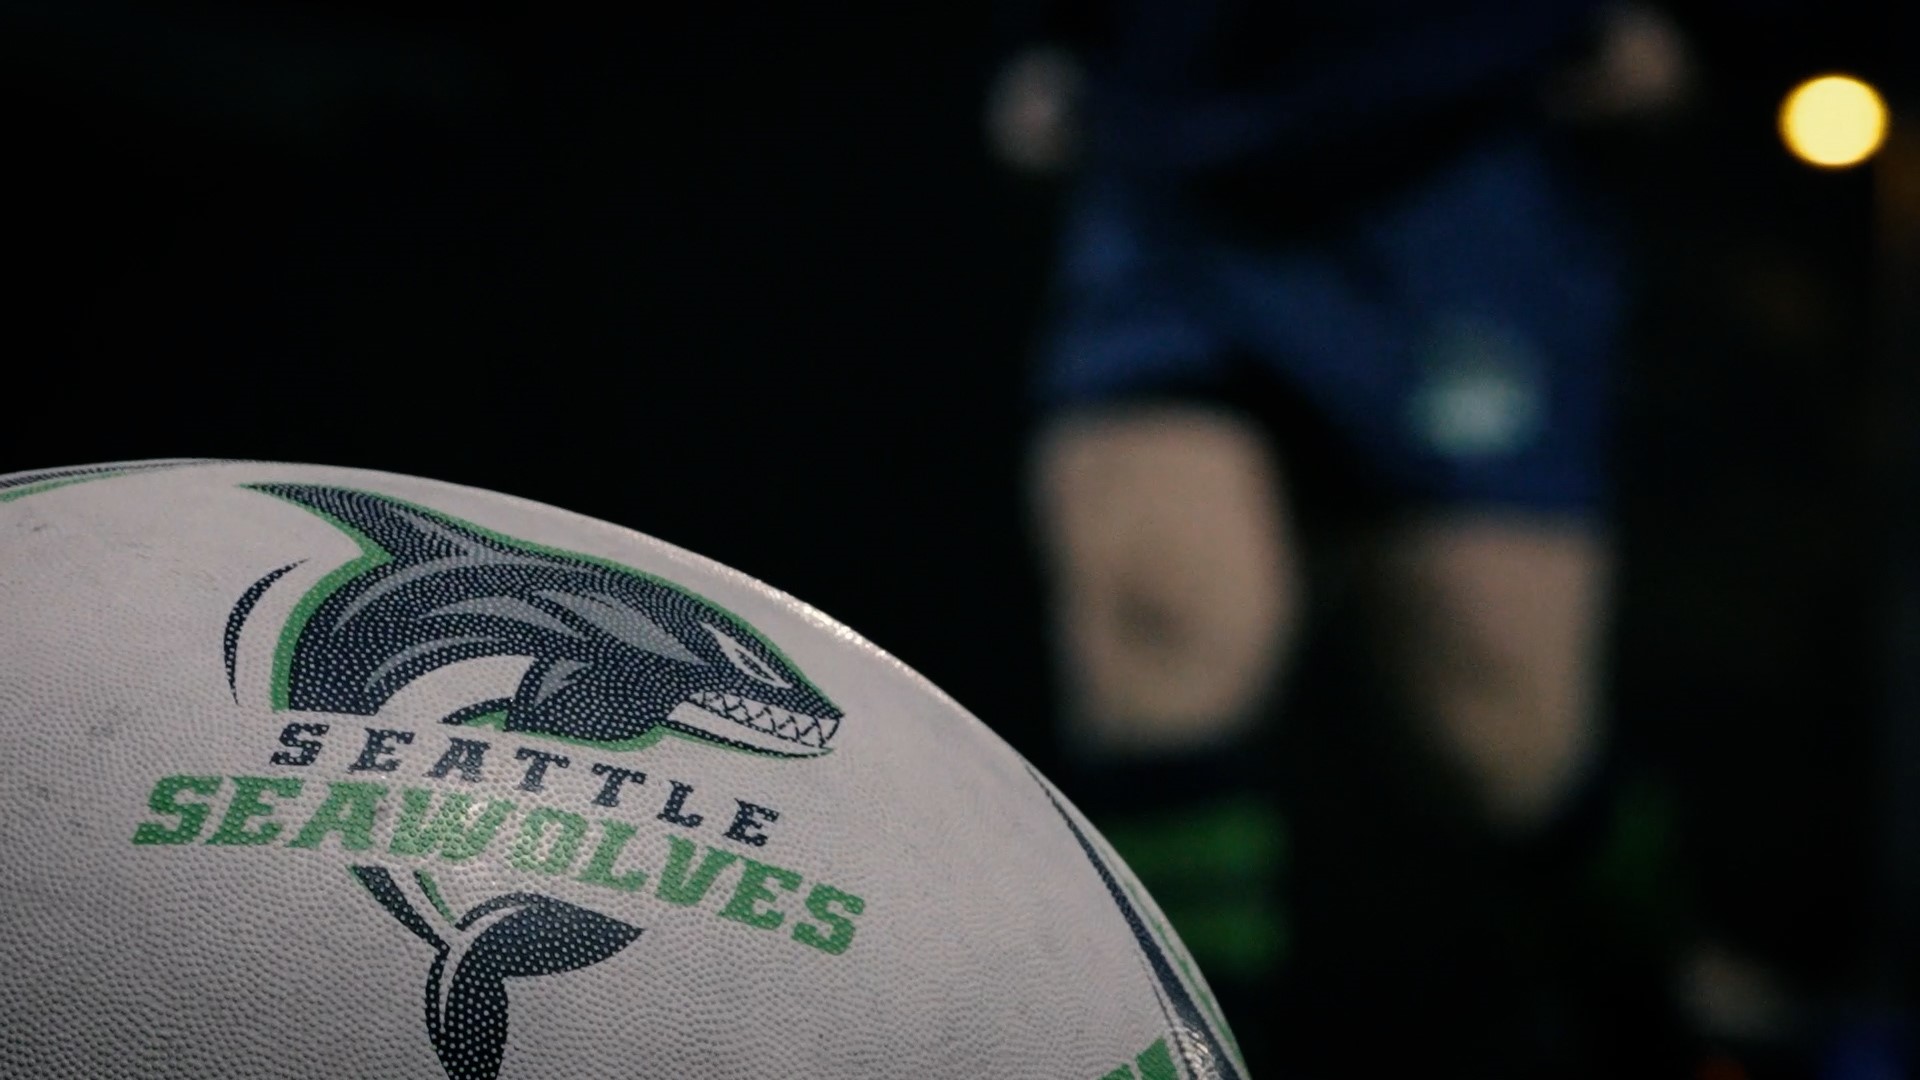 The Seawolves bring a passion for rugby to Seattle fans. #k5evening